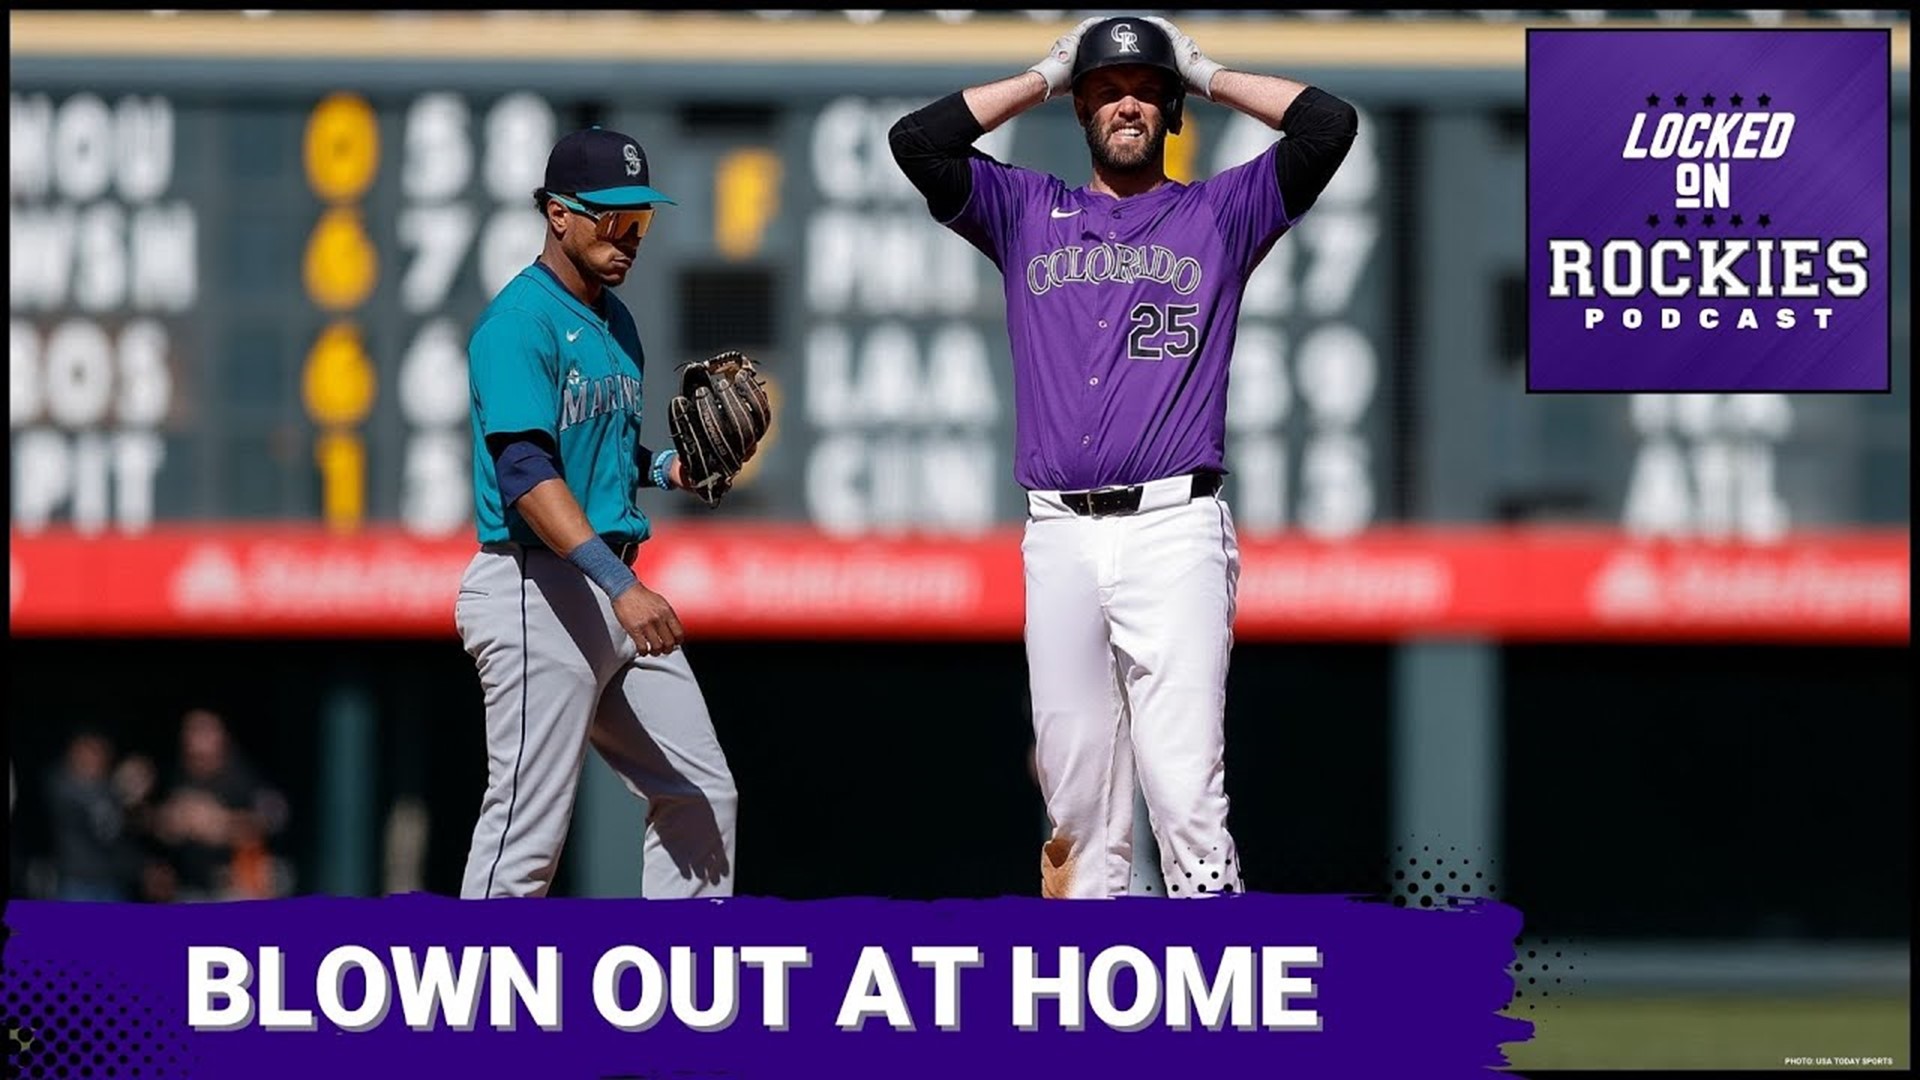 The Colorado Rockies struck out a lot and were outscored 18-4 at home. Luckily the team managed to split the doubleheader to avoid back to back sweeps.